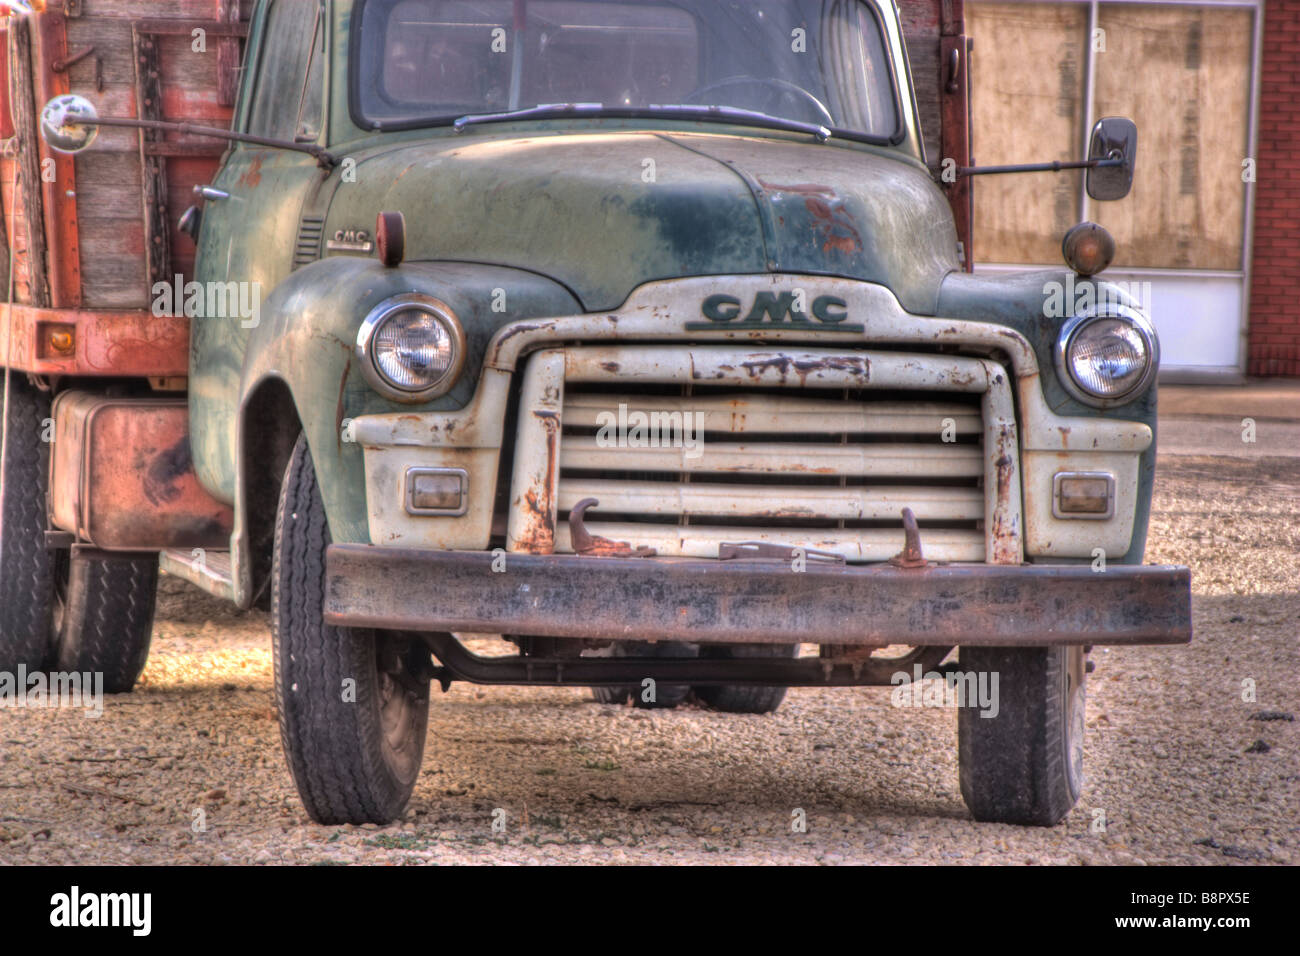 1950 s era dump truck in an HDR image Stock Photo